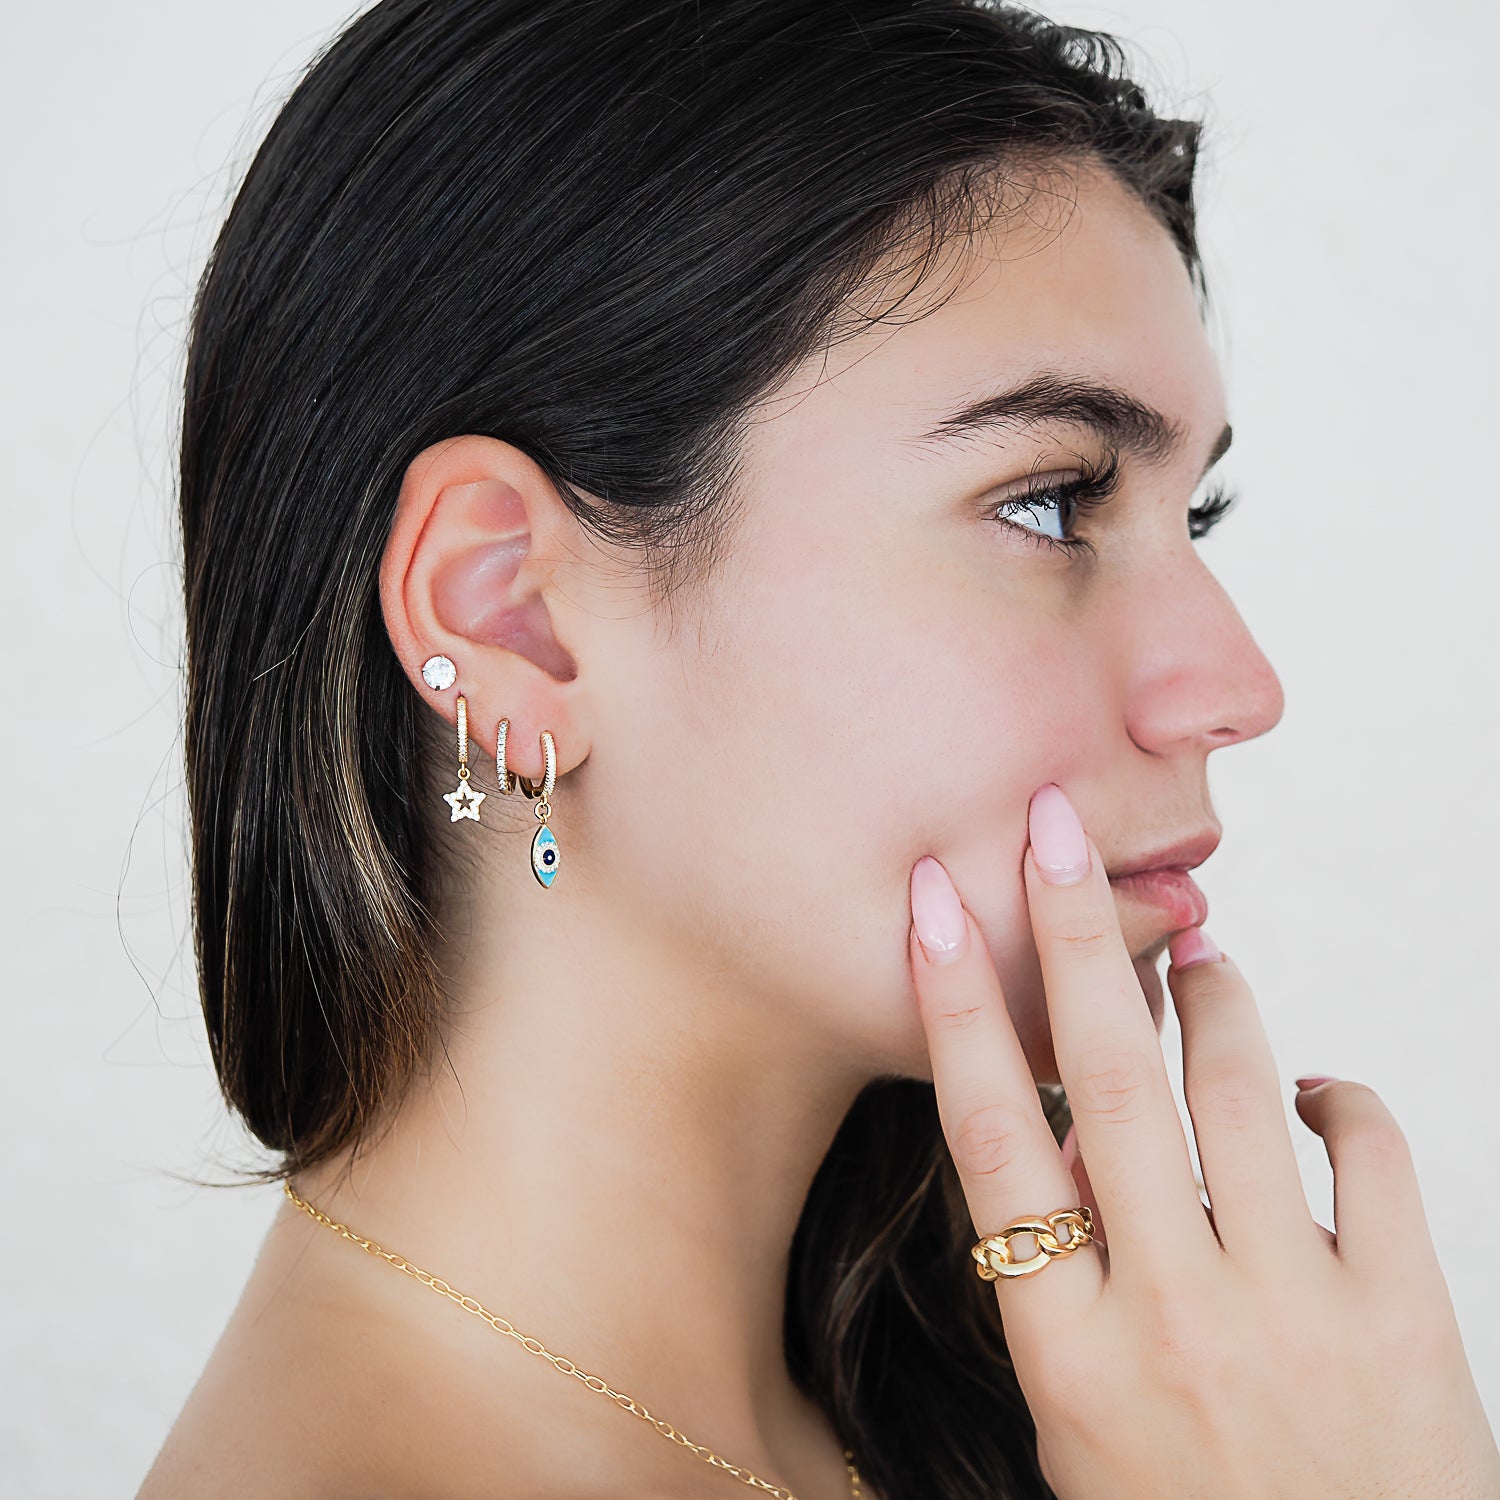 Model confidently showcasing the Turquoise Sparkly Gold Evil Eye Earrings